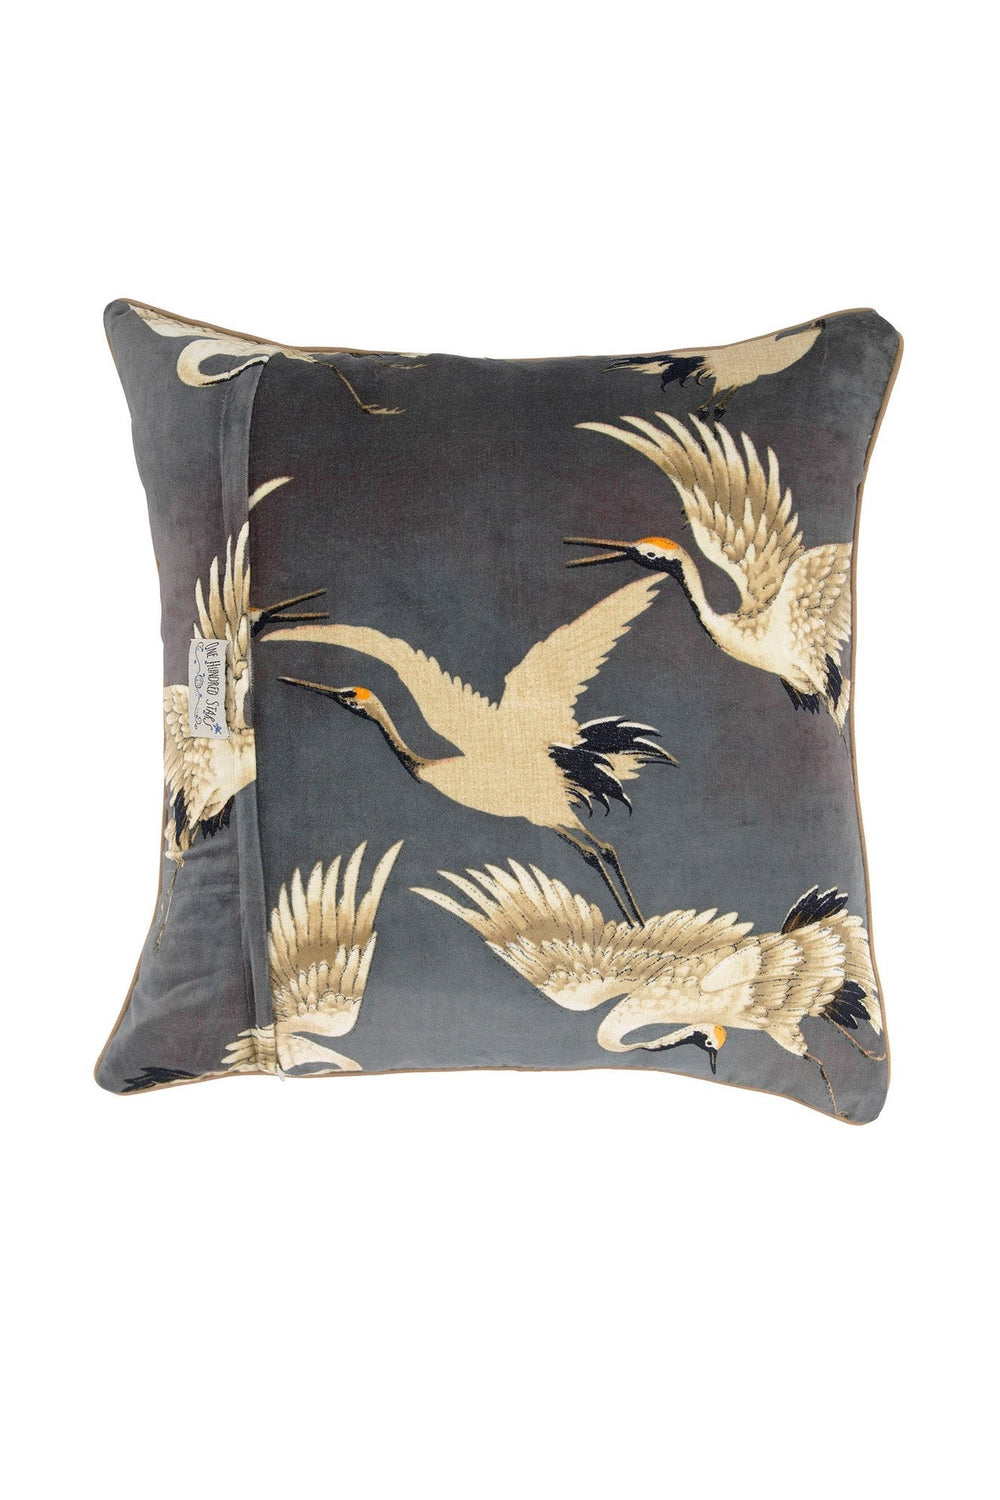 One Hundred Stars Stork Crane Slate Grey Square Velvet Cushion - These limited edition velvet cushions are 50 x 50cm and can purchased with or without an ethically sourced duck feather inner.